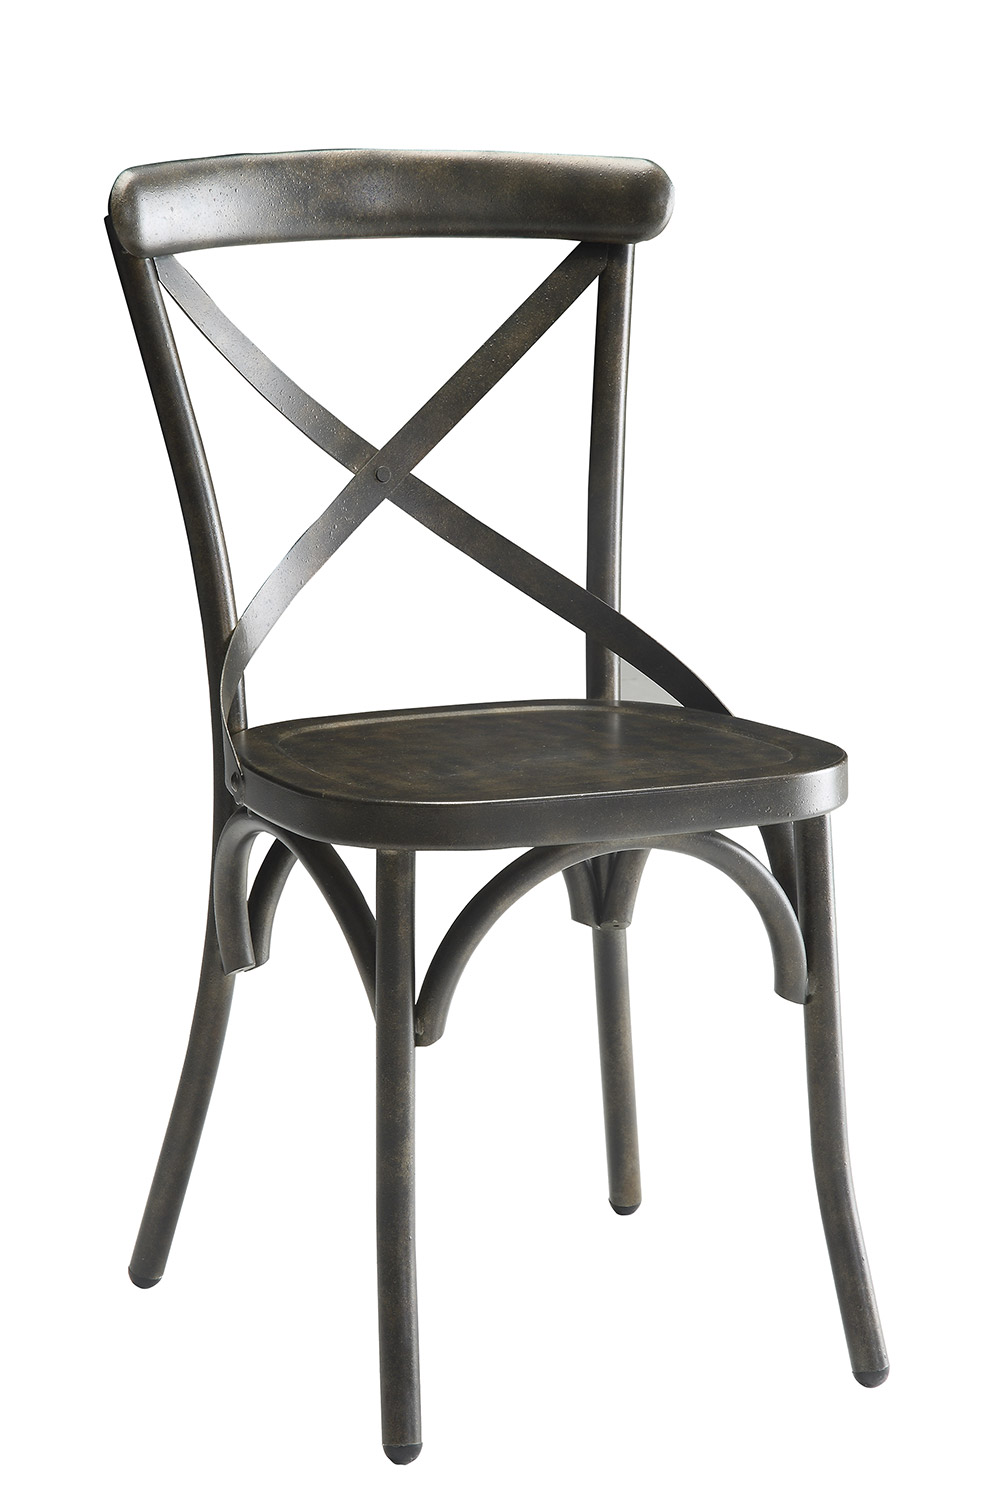 Coaster Nagel Dining Side Chair - Antique Brown